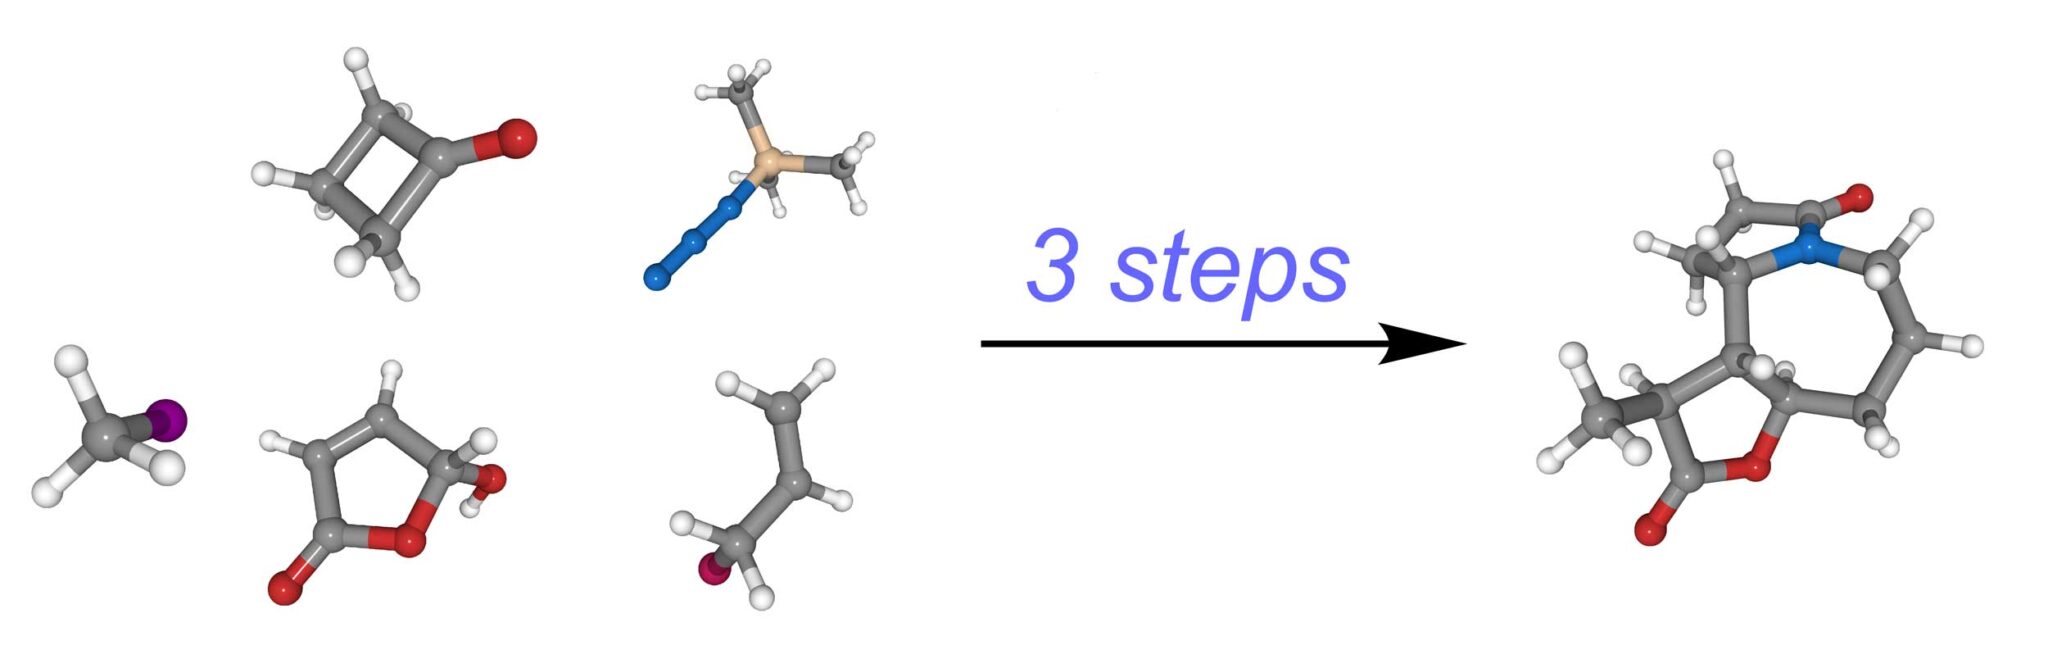 duplicating a complex molecule in only three steps